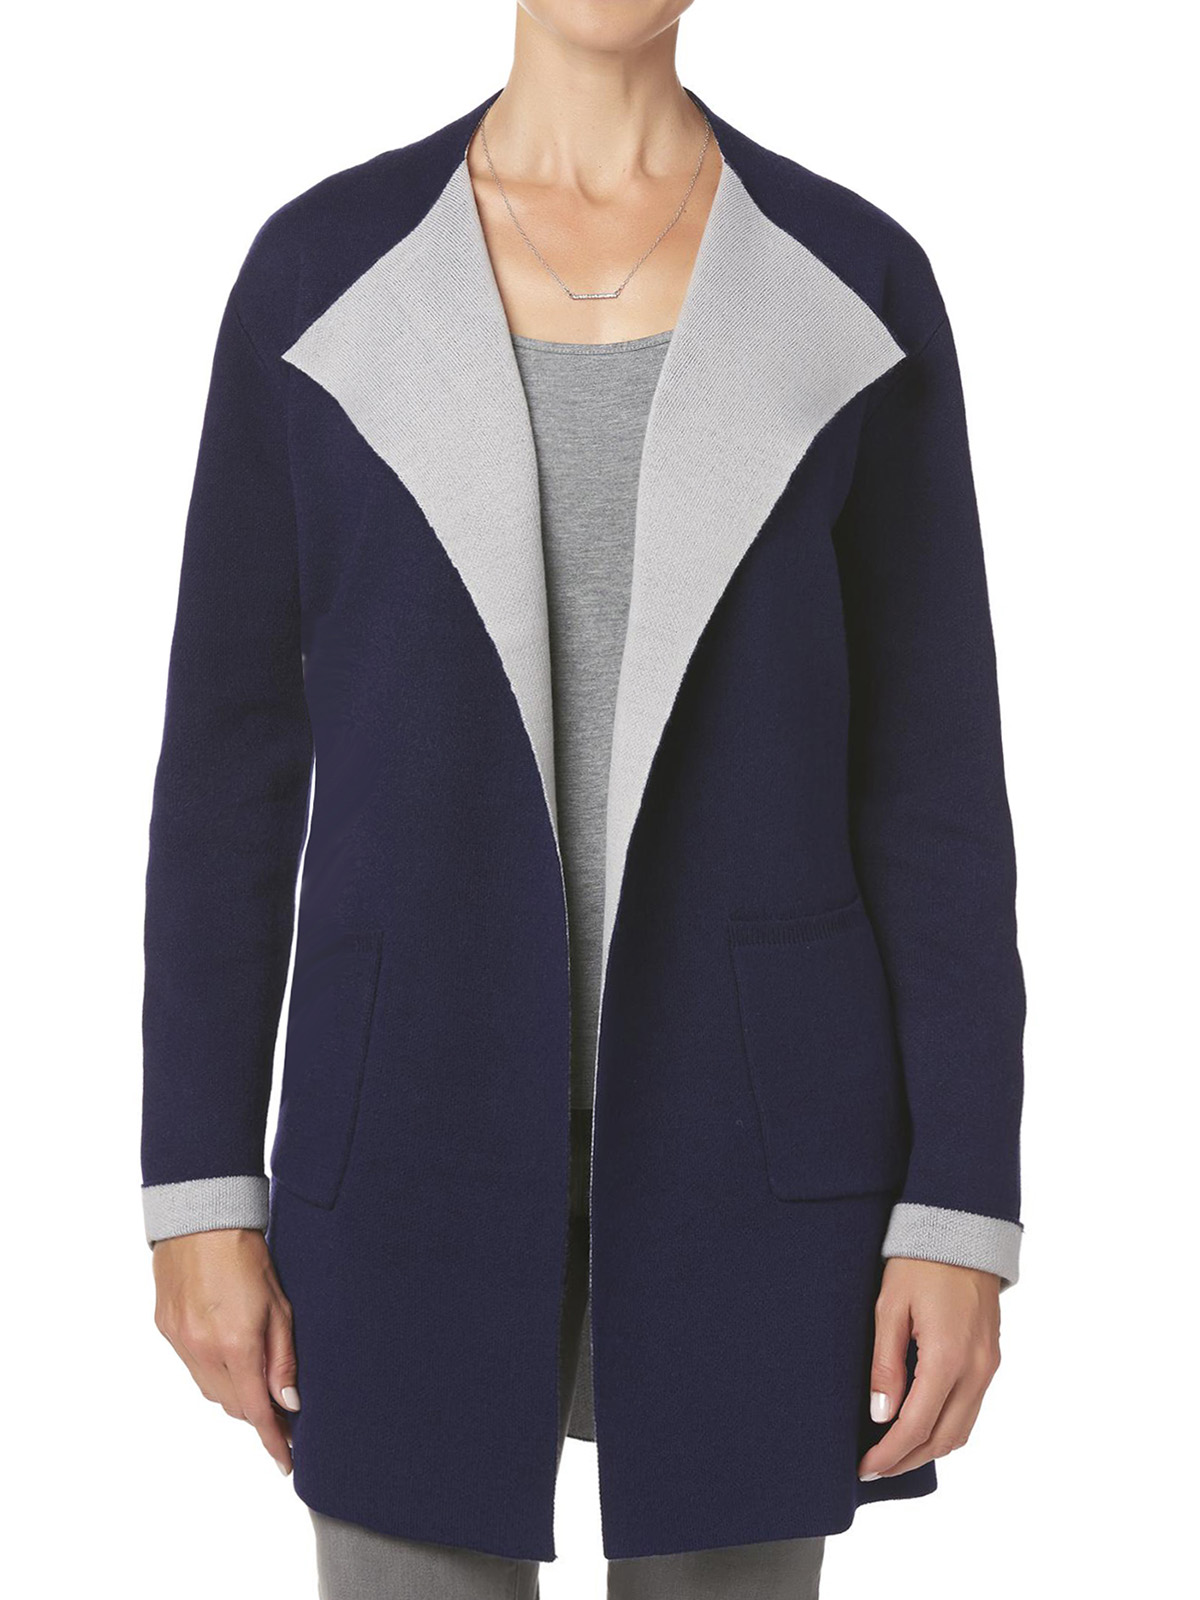 Jaclyn Smith - - Jaclyn Smith NAVY Open Front Cardigan - Size 6/8 to 22 ...